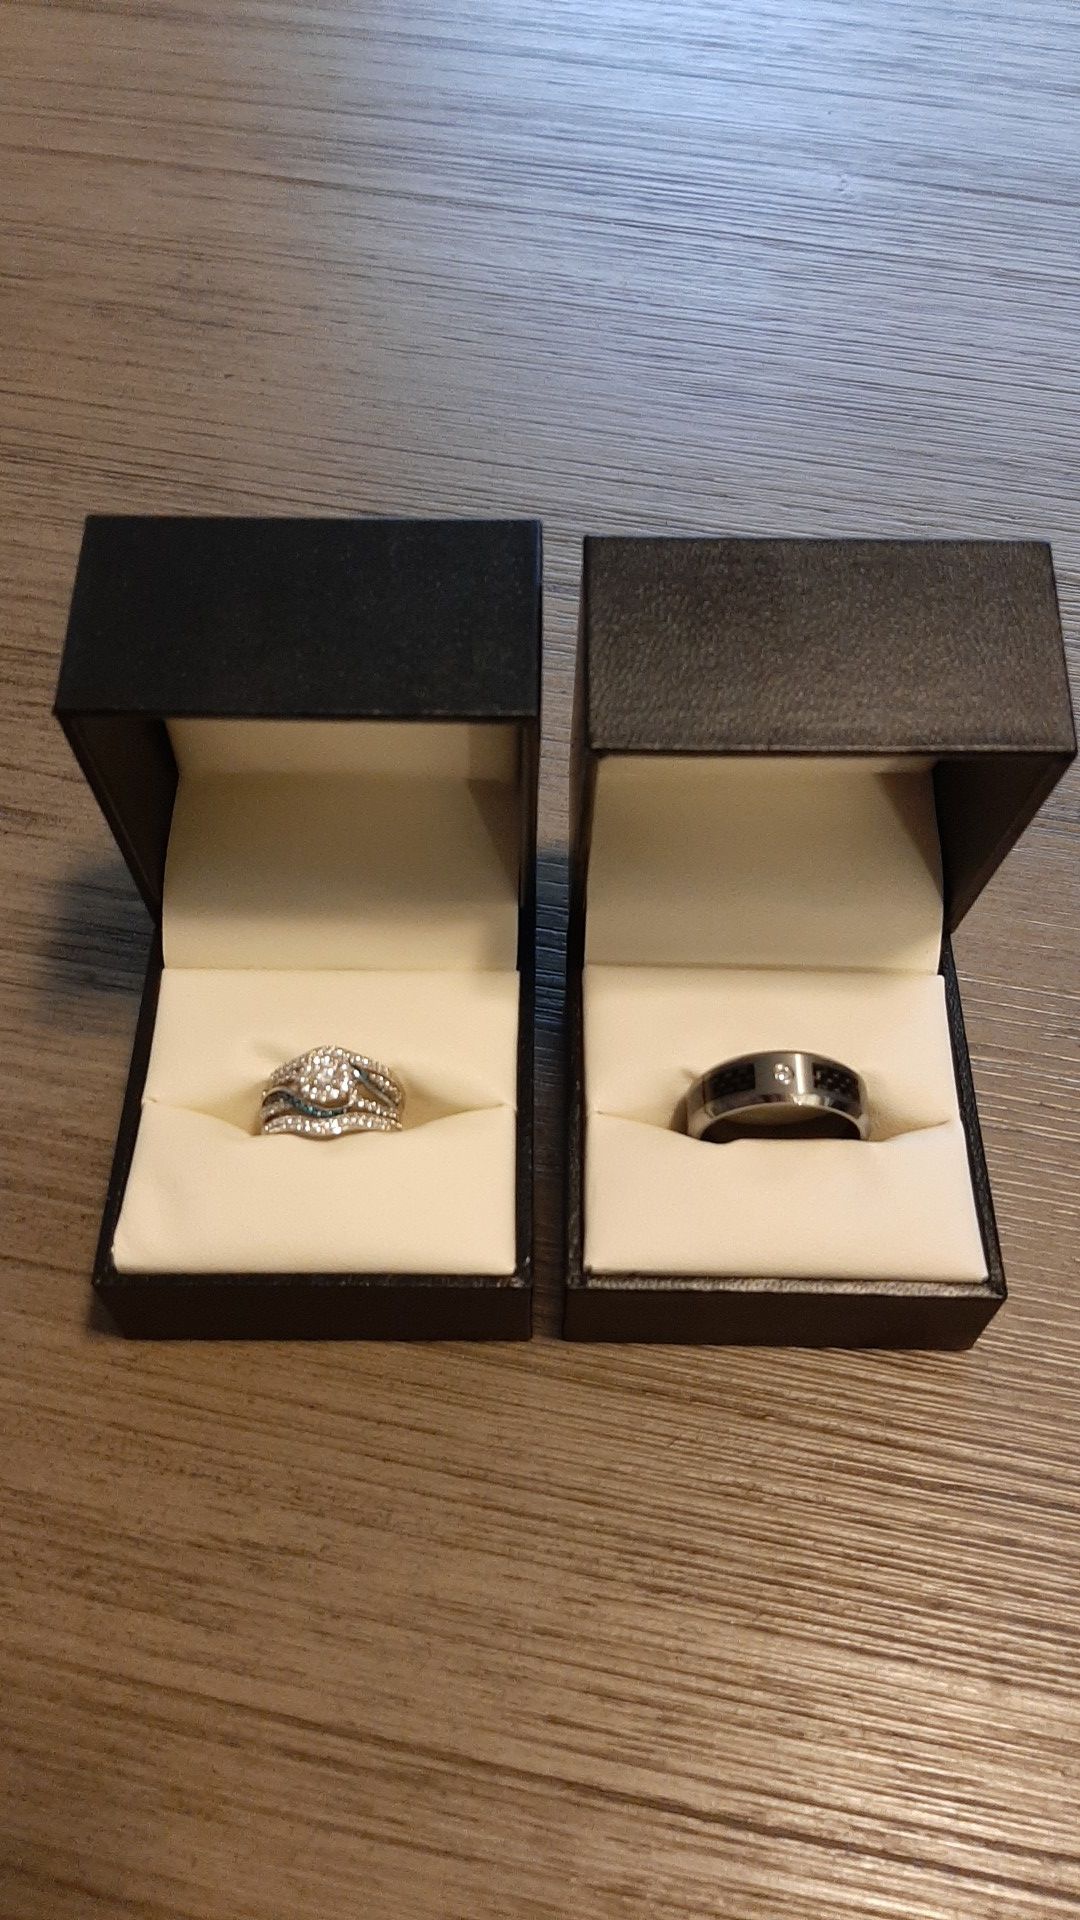 Brand new wedding ring set / will sell separately